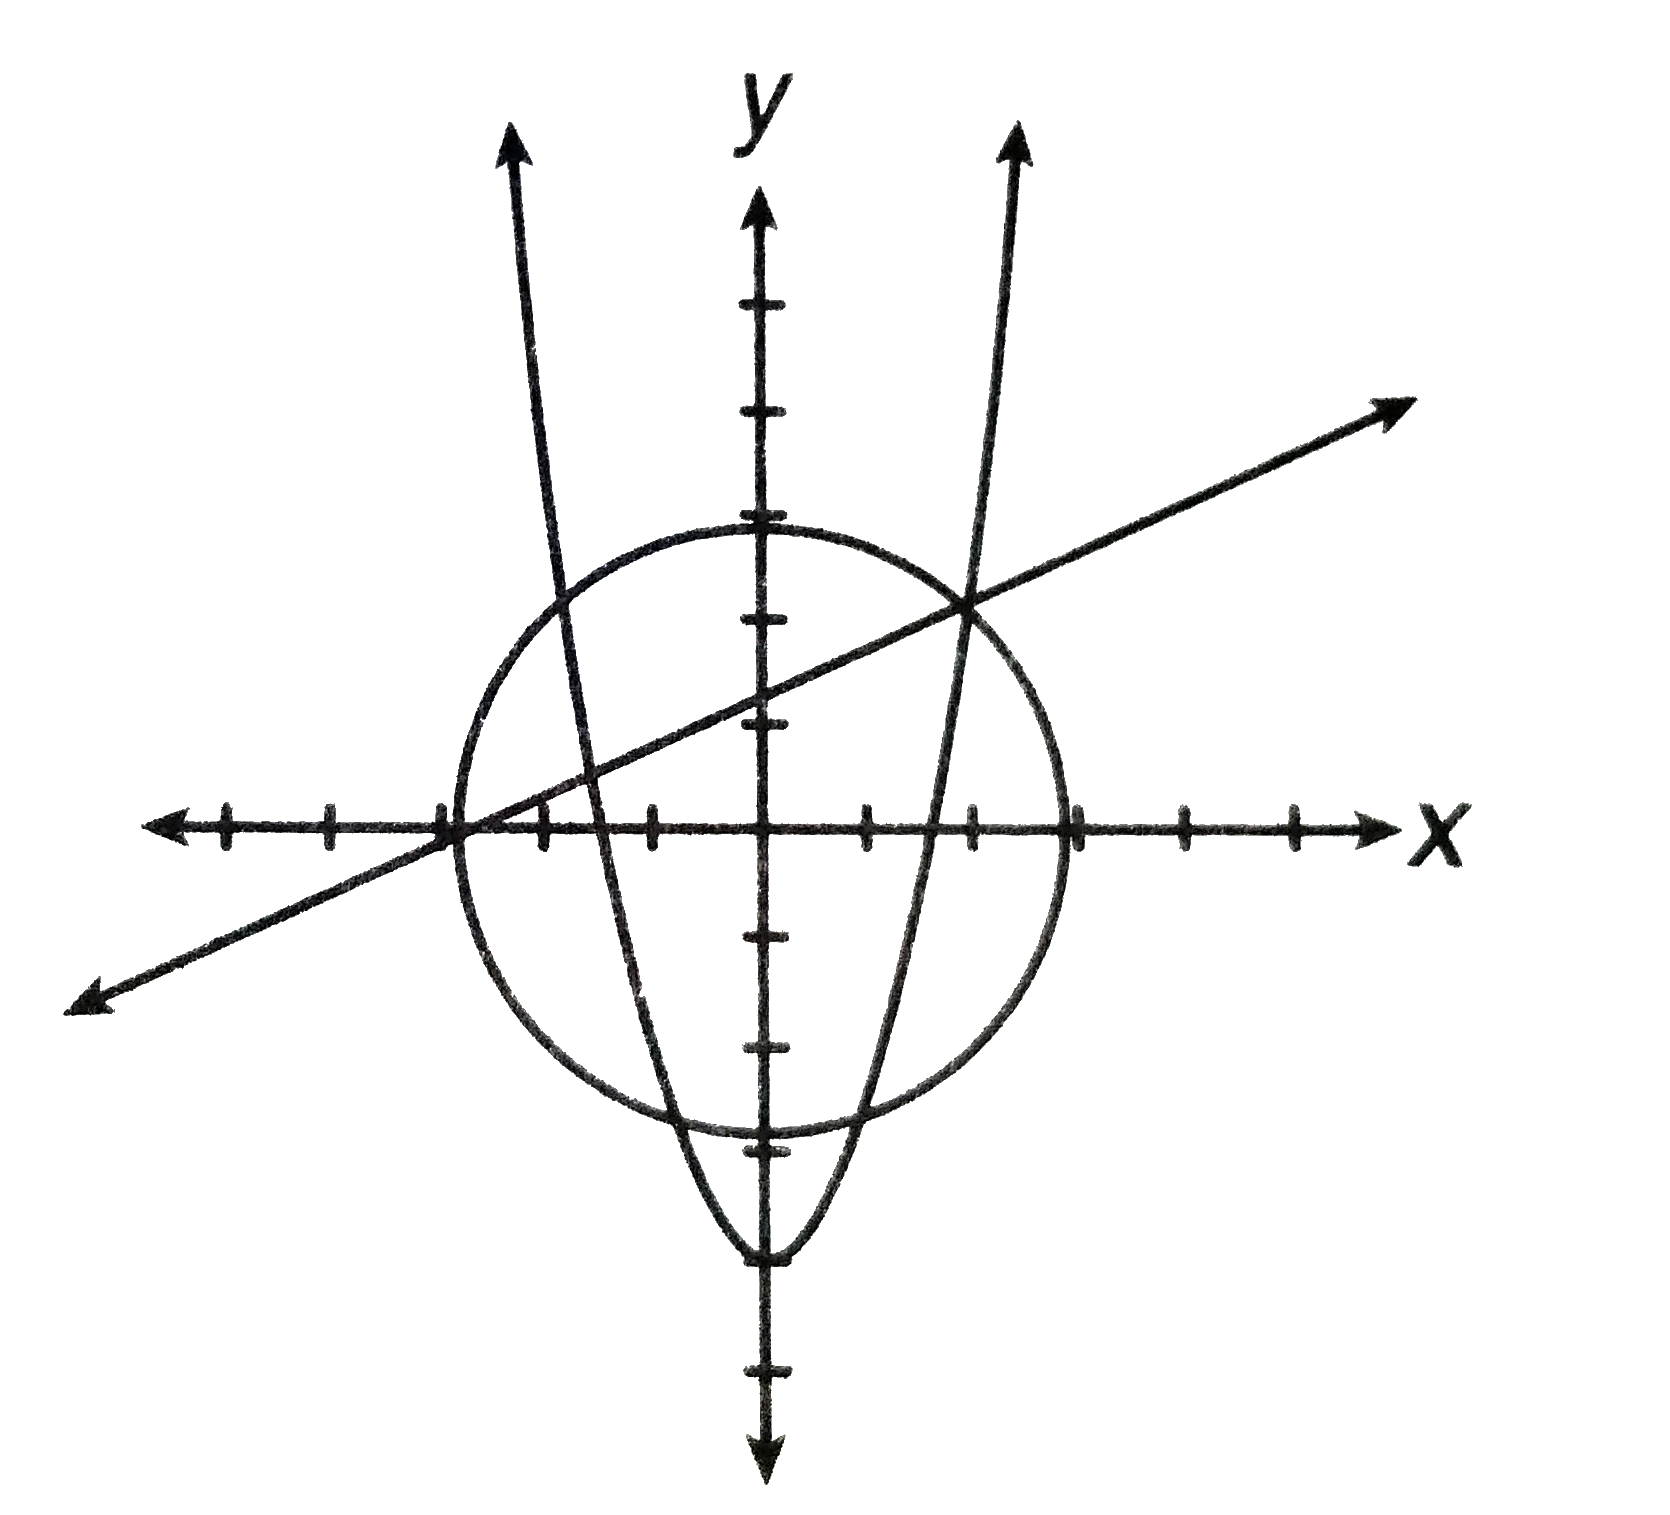 A system of three equations whose graph in the xy-plane are a line, a circle, and a parabola are shown above. How many solutions does the system have?